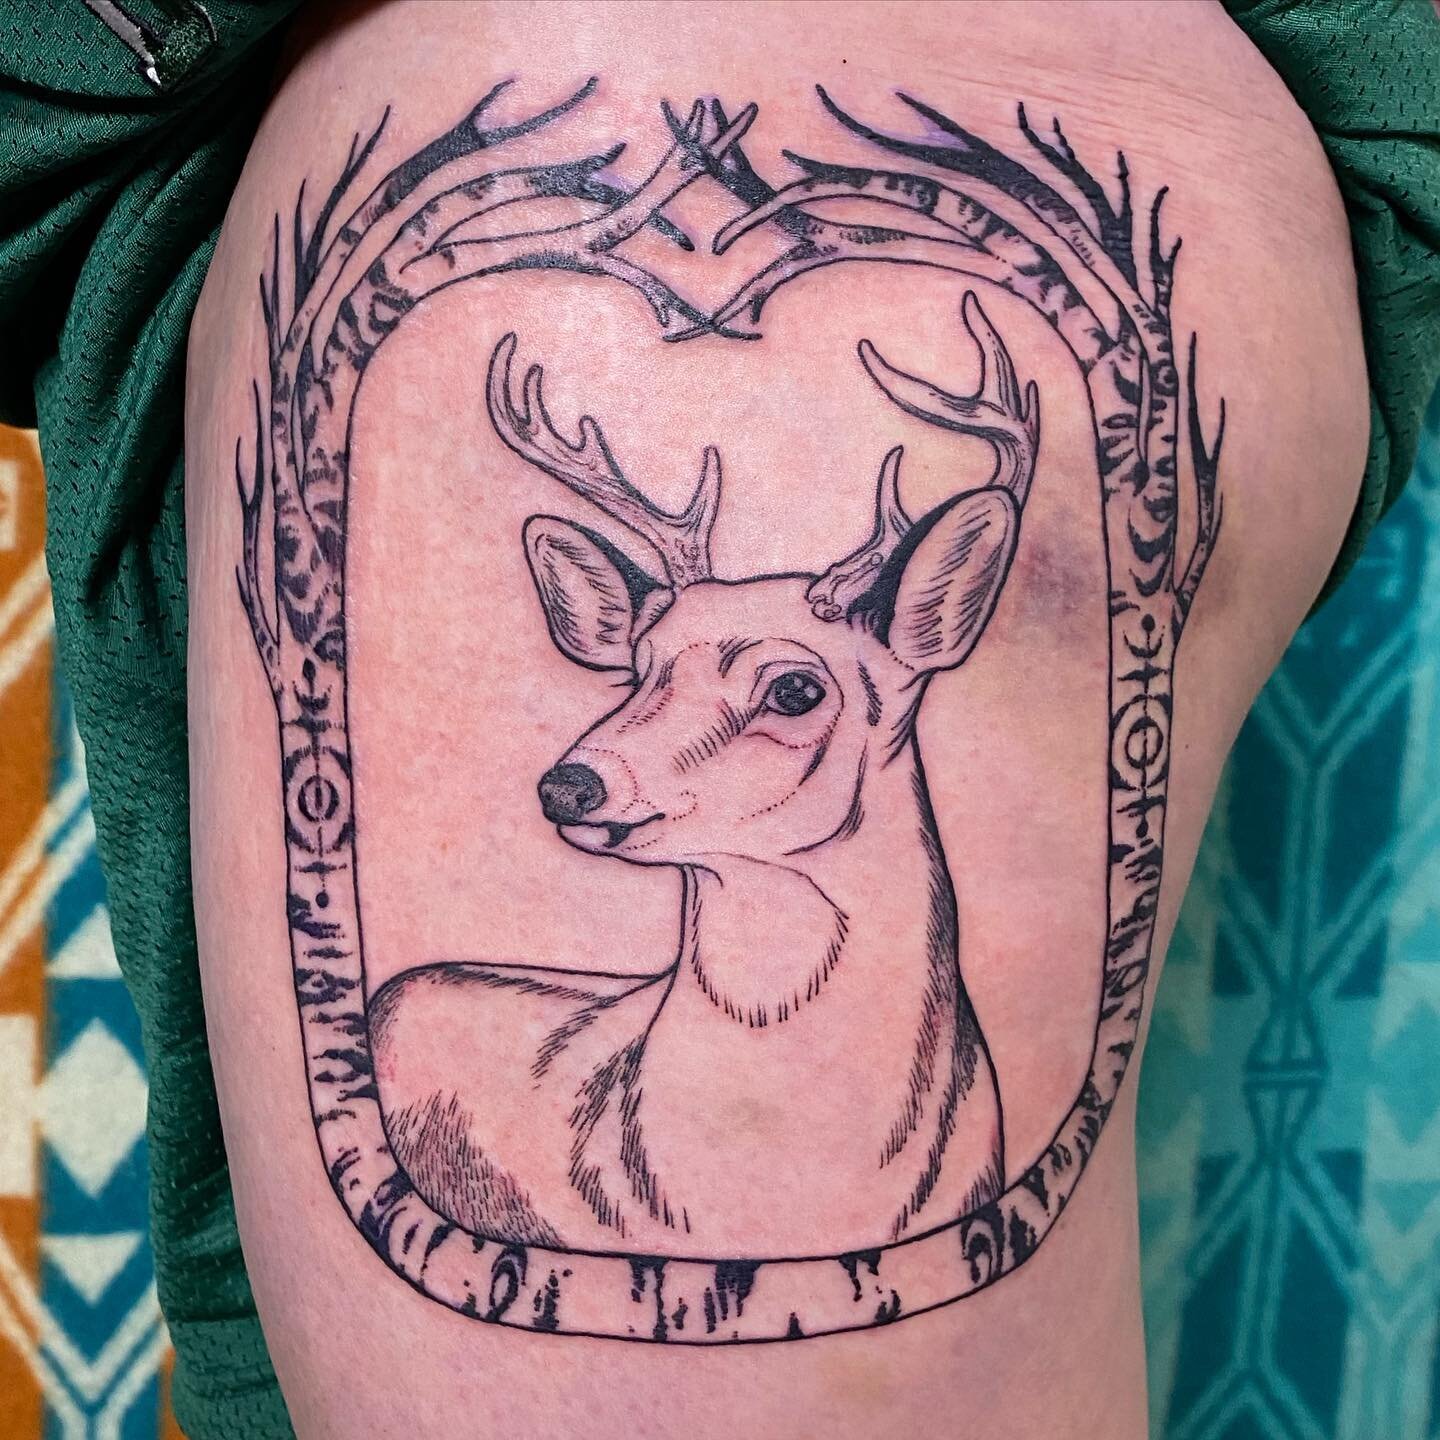 A buck in honor of Buck, framed by the Stockbridge-Munsee Many Trails sign growing in birch, on the incredible @waksik (who is so tough for getting tattooed over a huge roller derby bruise!)